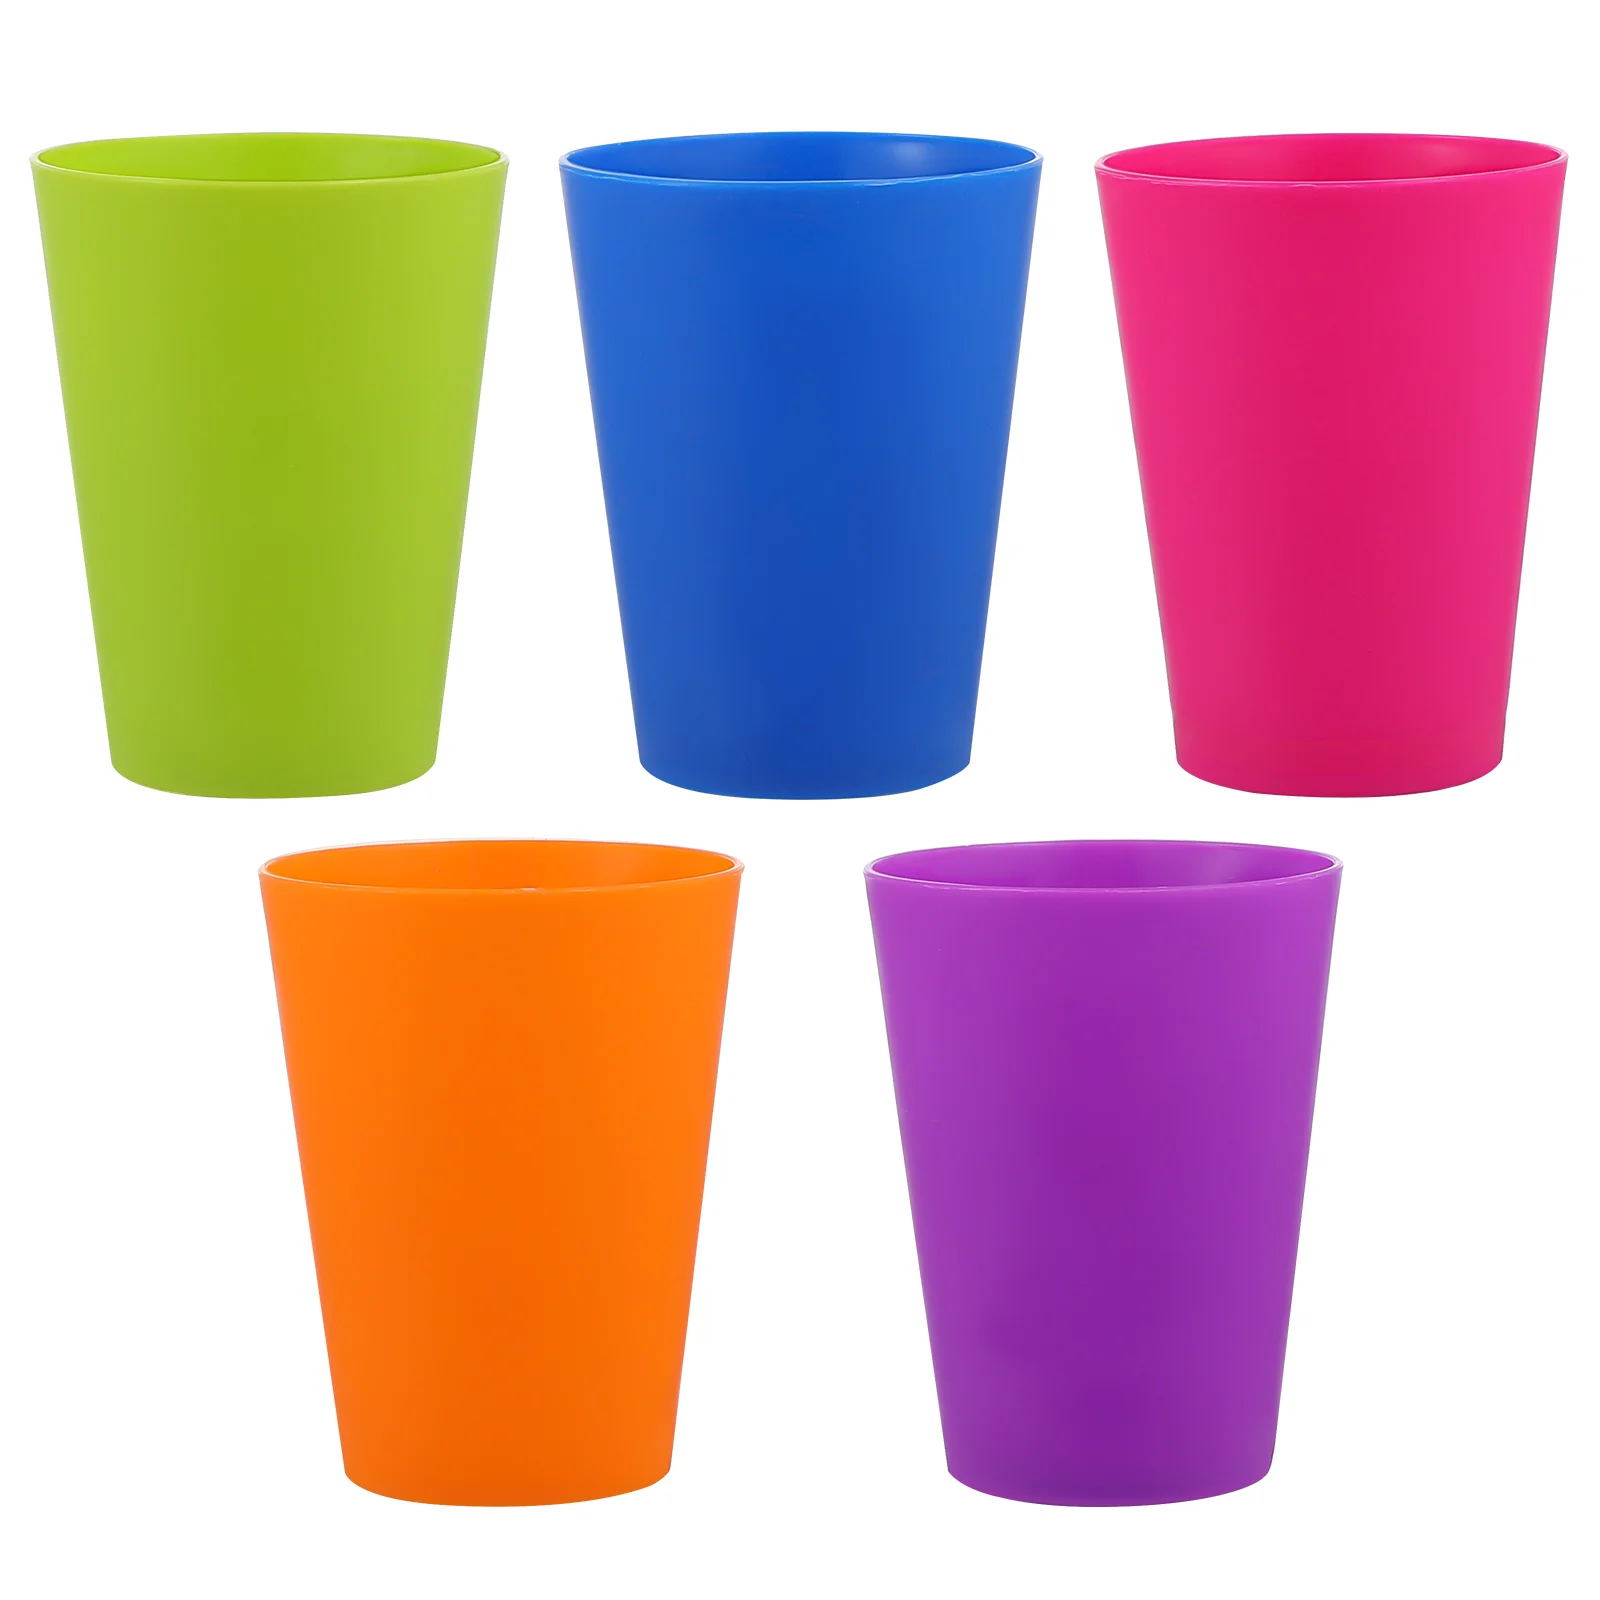 

TOYMYTOY 15pcs Colorful Plastic Cups Home Beverage Drinking Cups Reusable Holiday Party Tableware and Party Supplies 101-200ml